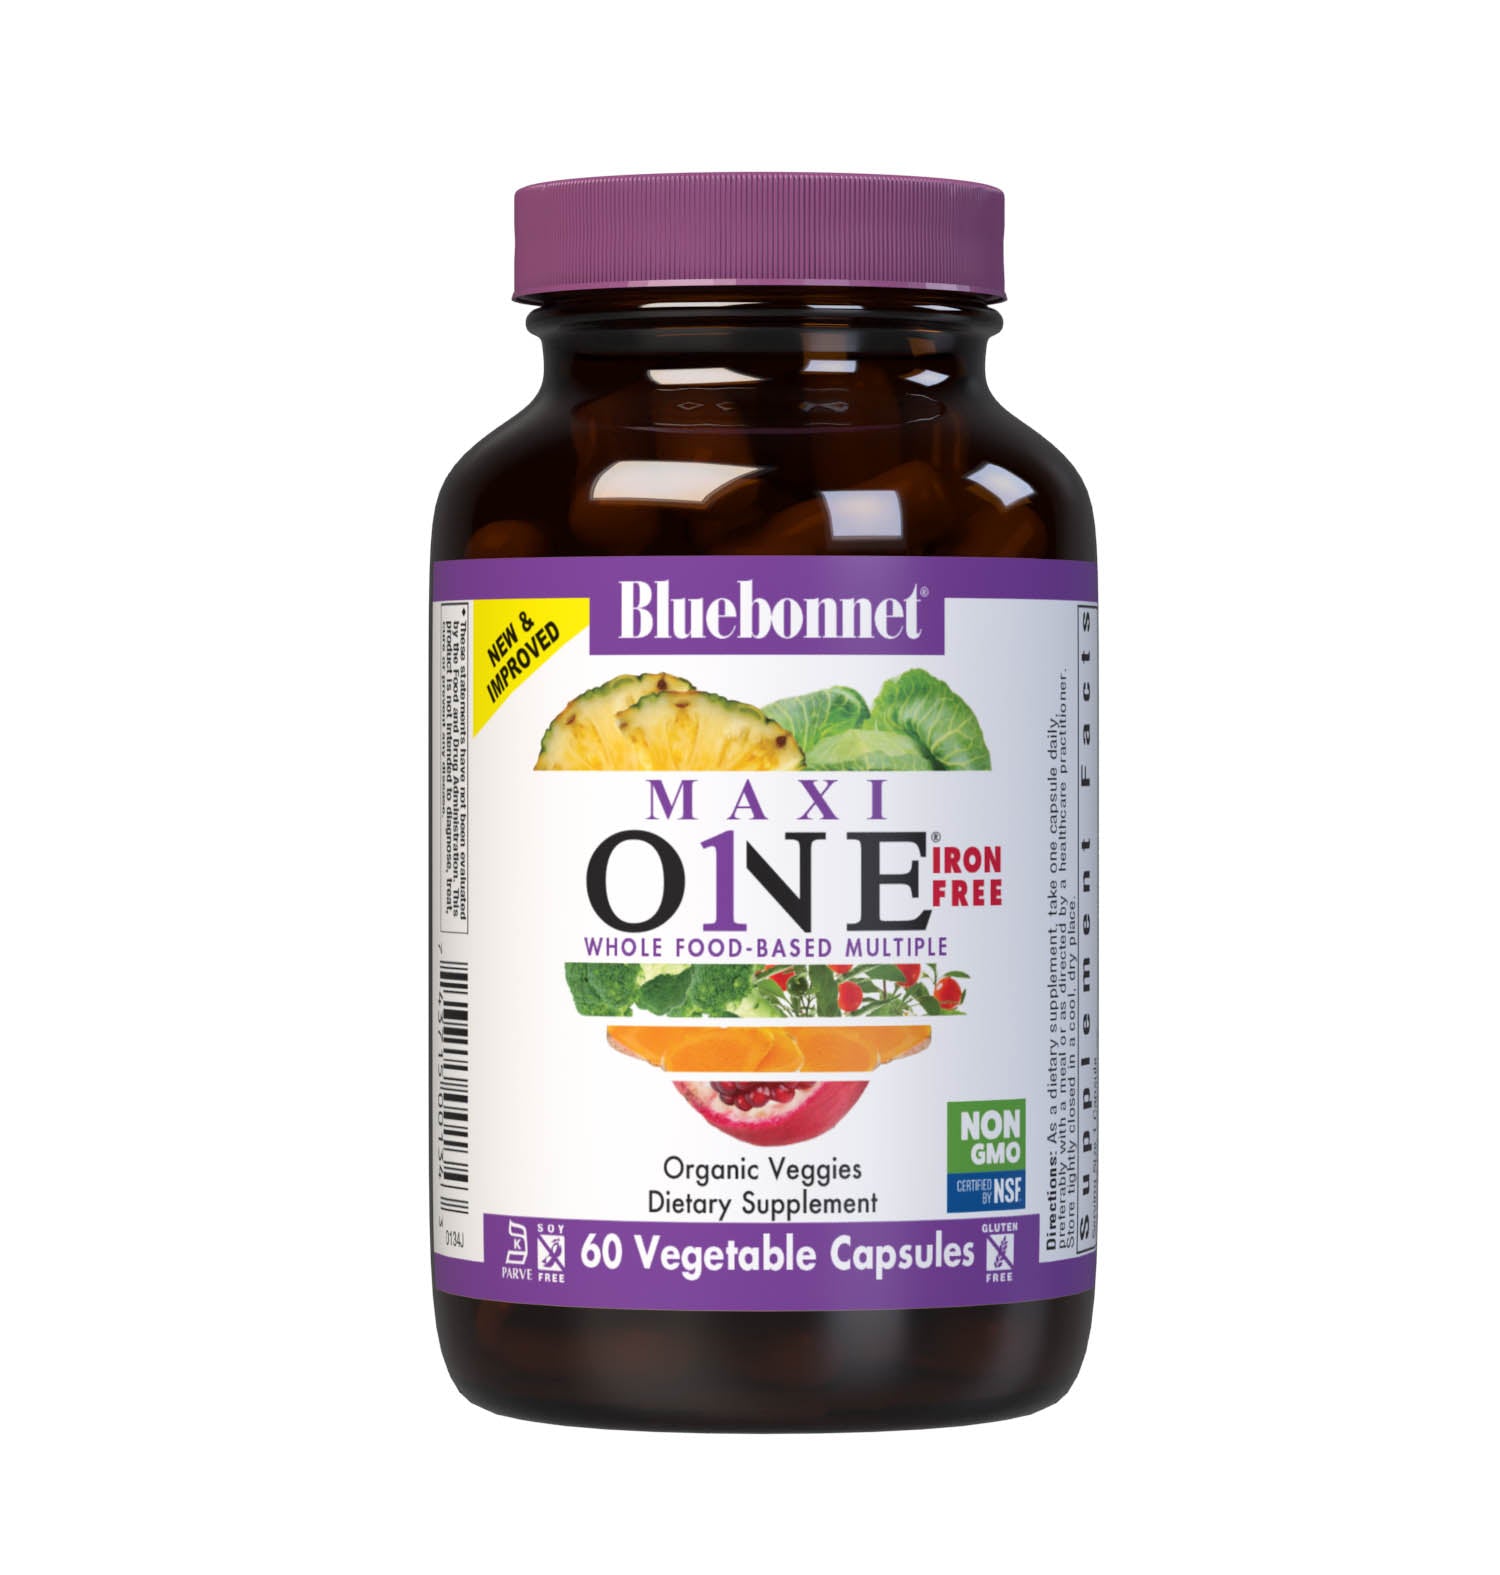 Bluebonnet’s Maxi ONE formula (Iron-Free) 60 vegetable capsules is a higher potency, single daily multivitamin and multimineral dietary supplement in a capsule and is formulated with highly efficient patented Albion chelated minerals, vitamin K2 from natto, select coenzyme B vitamins along with energy & vitality, organic whole food, and plant source enzyme blends. #size_60 count